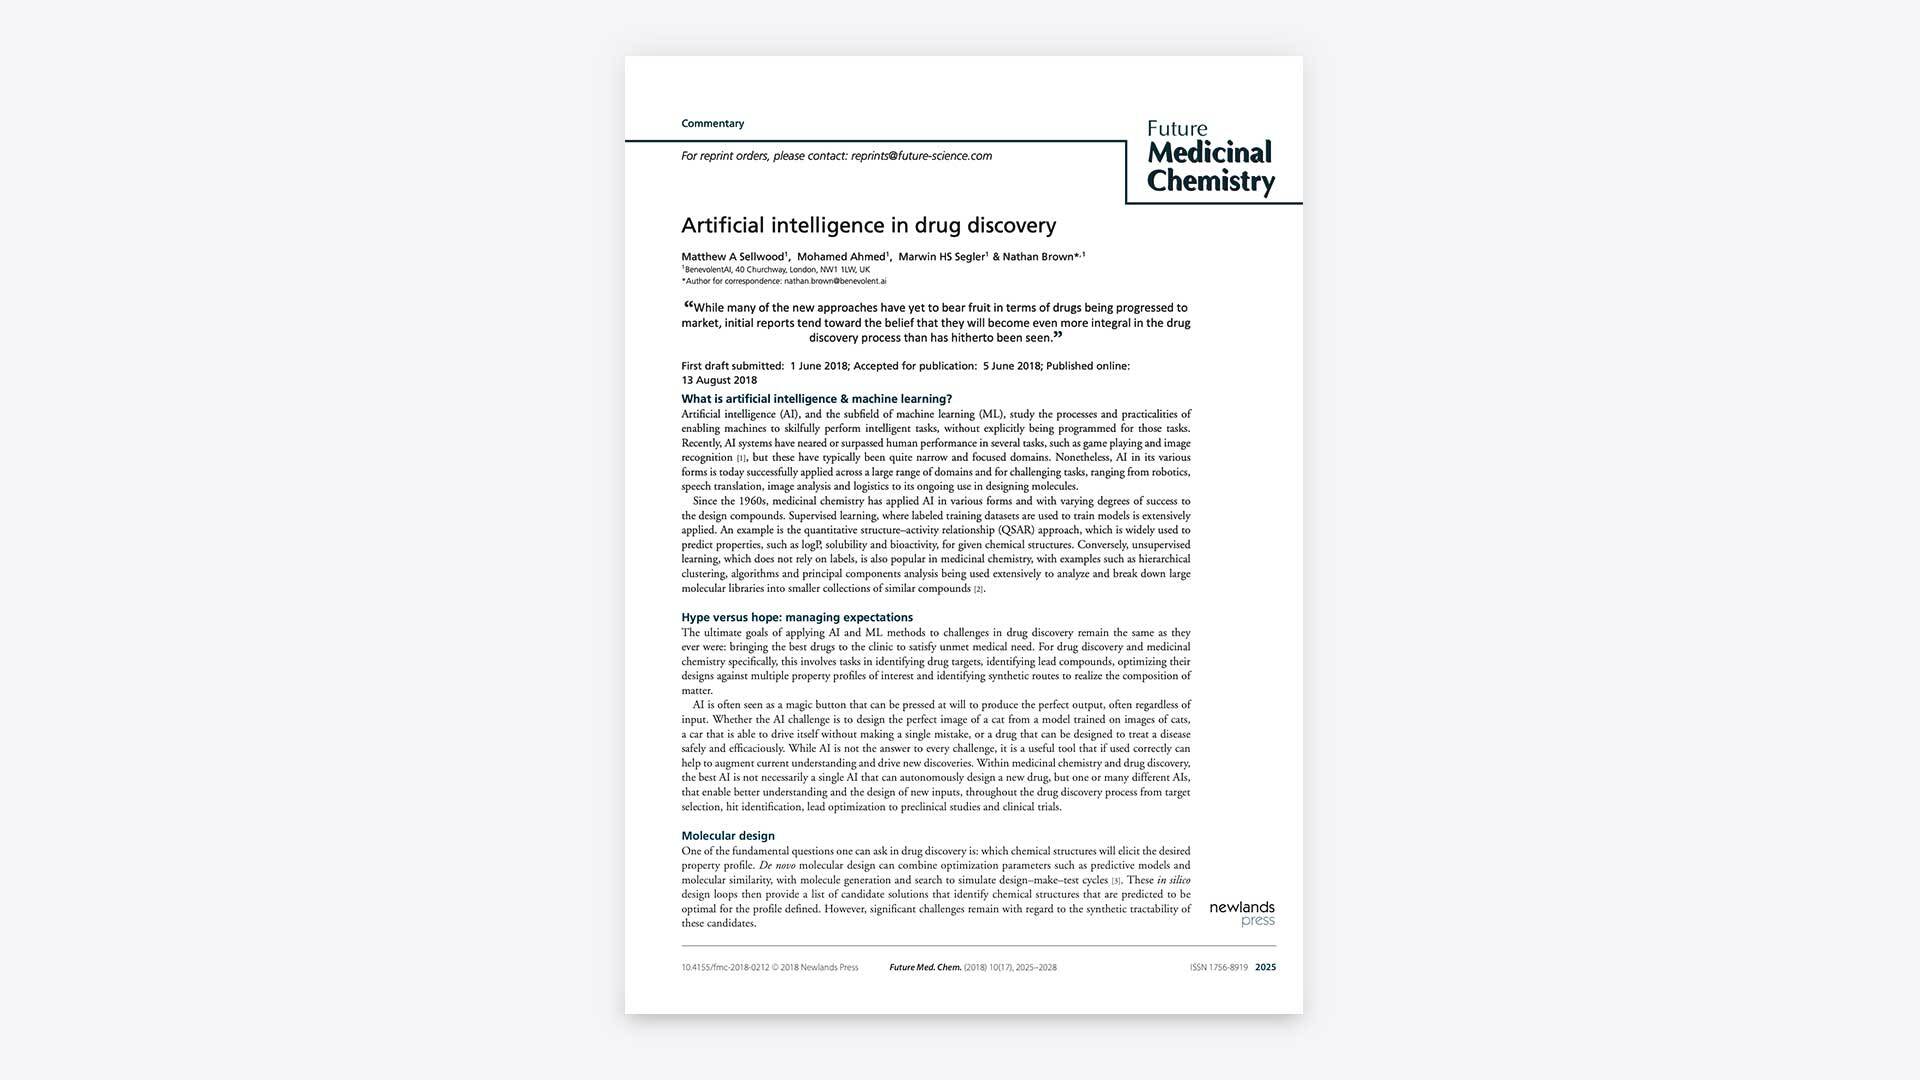 Artificial-intelligence-in-drug-discovery.jpg